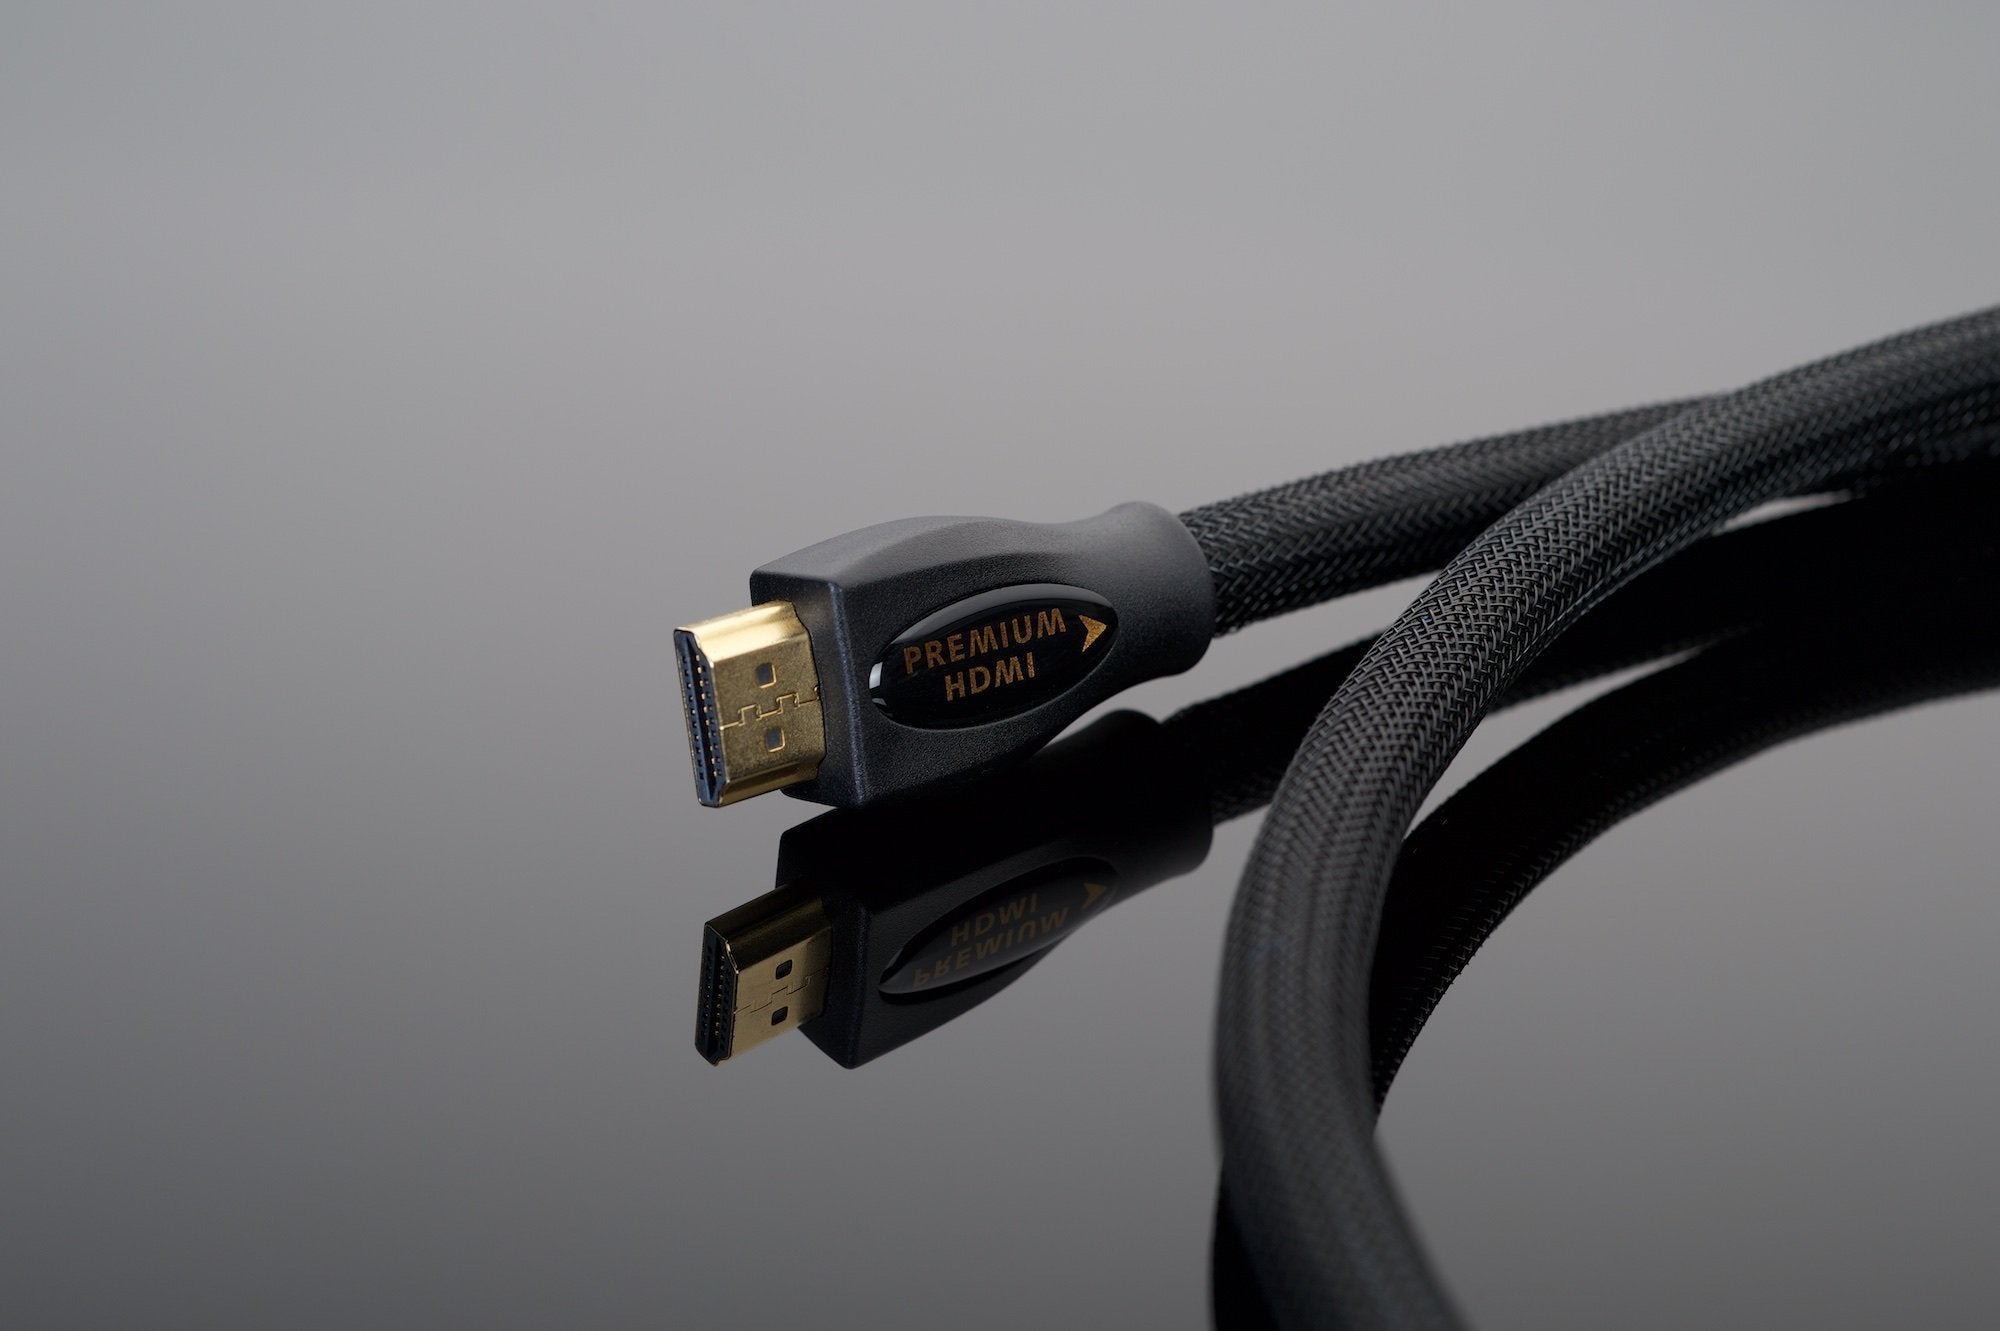 Hdmi to hdmi cable.